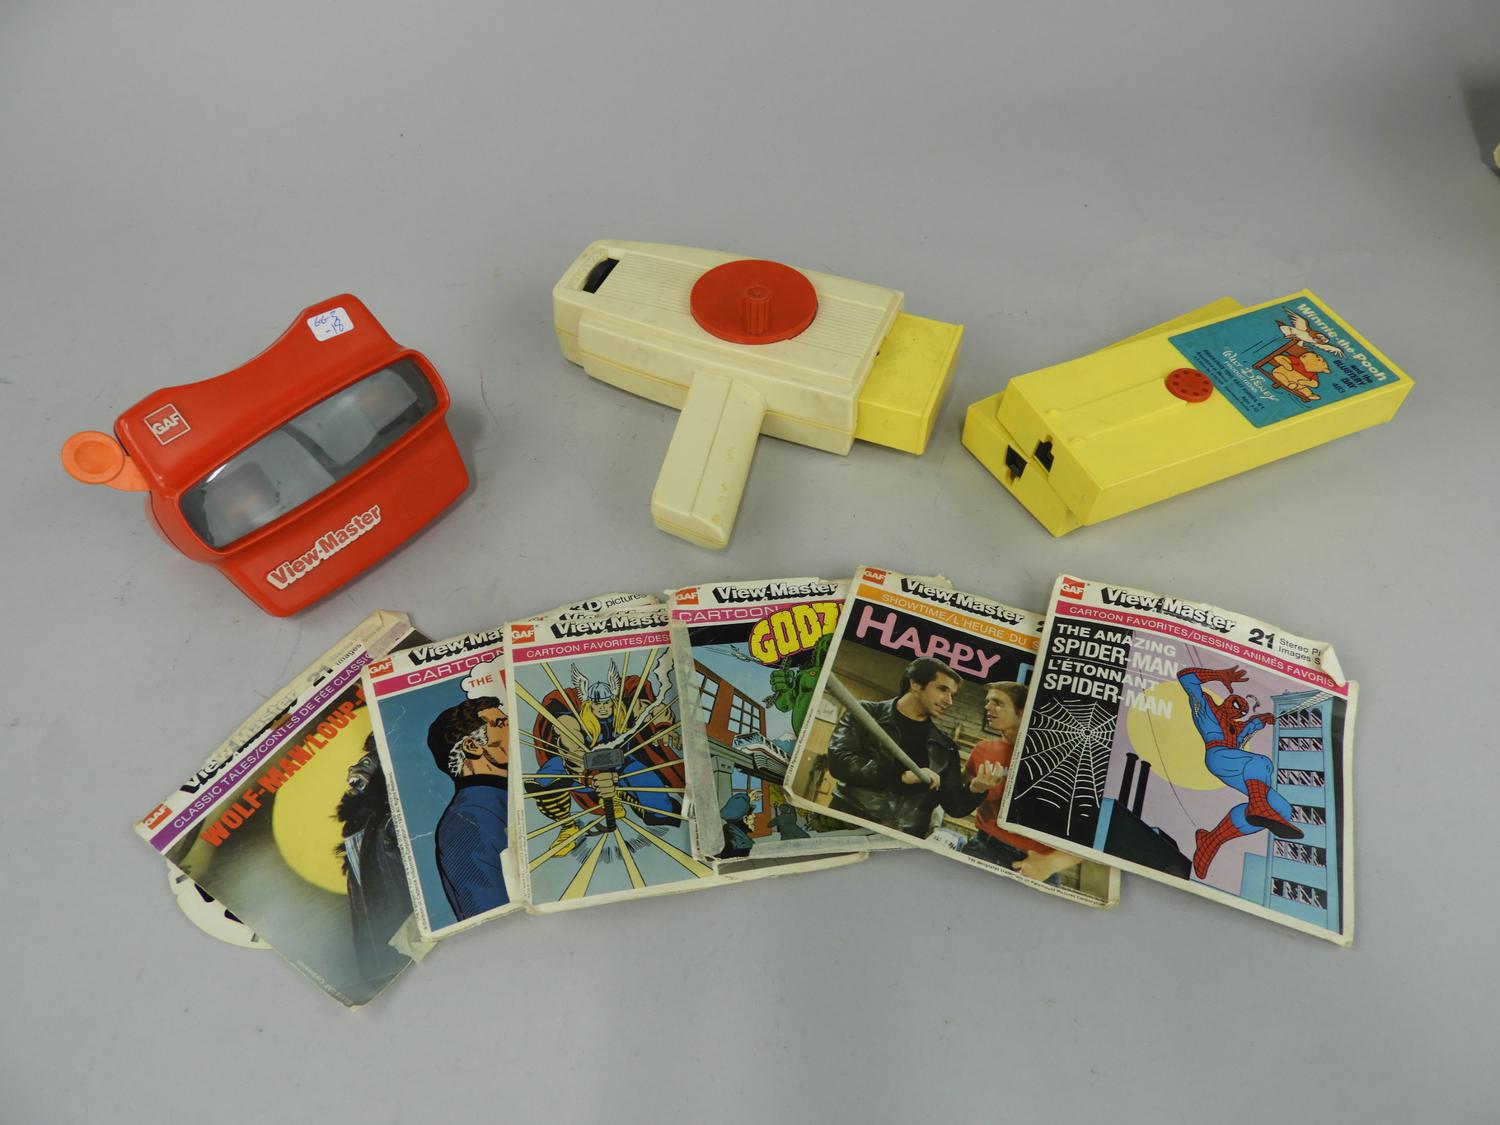 Murrays Auctioneers - Lot 345: View Master with reels including